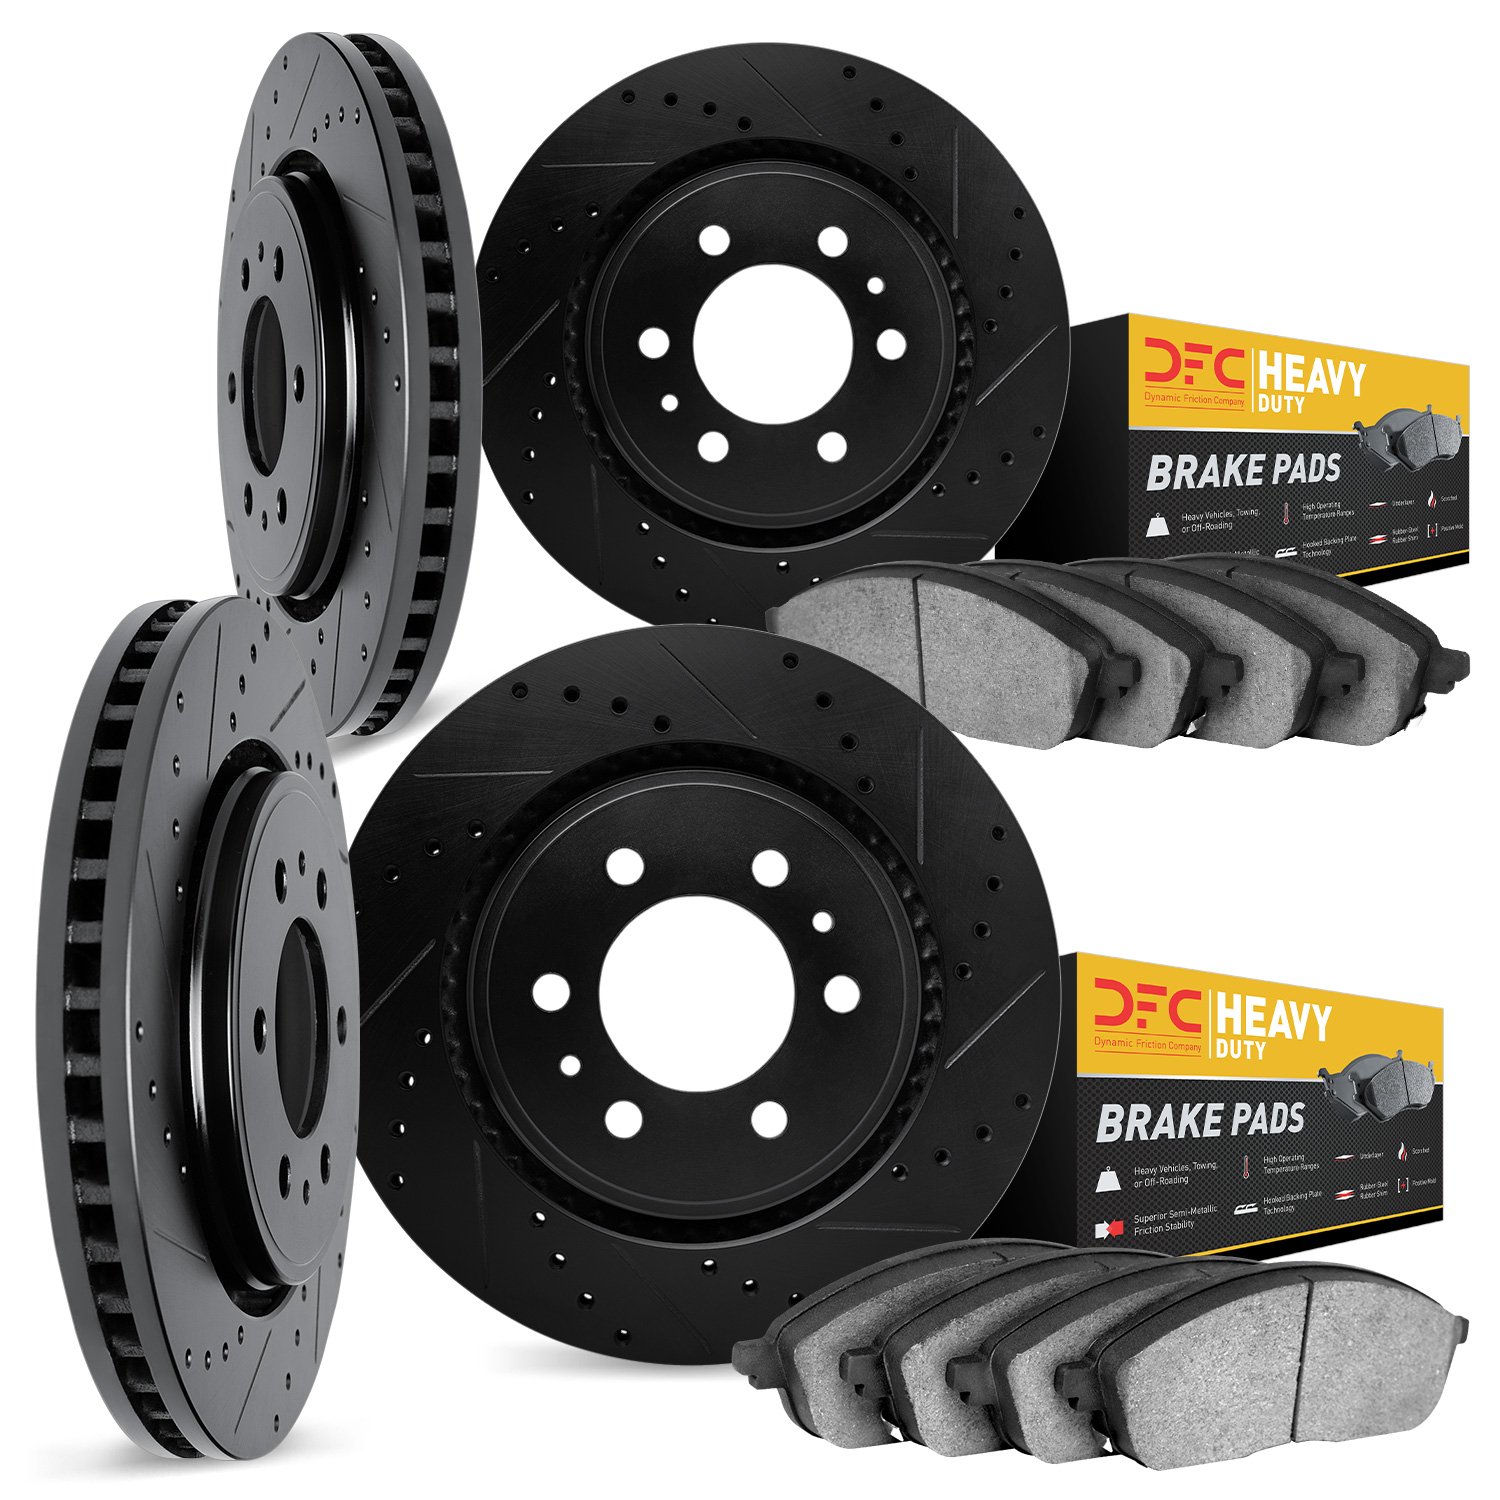 8204-99079 Drilled/Slotted Rotors w/Heavy-Duty Brake Pads Kit [Silver], 2004-2008 Ford/Lincoln/Mercury/Mazda, Position: Front an